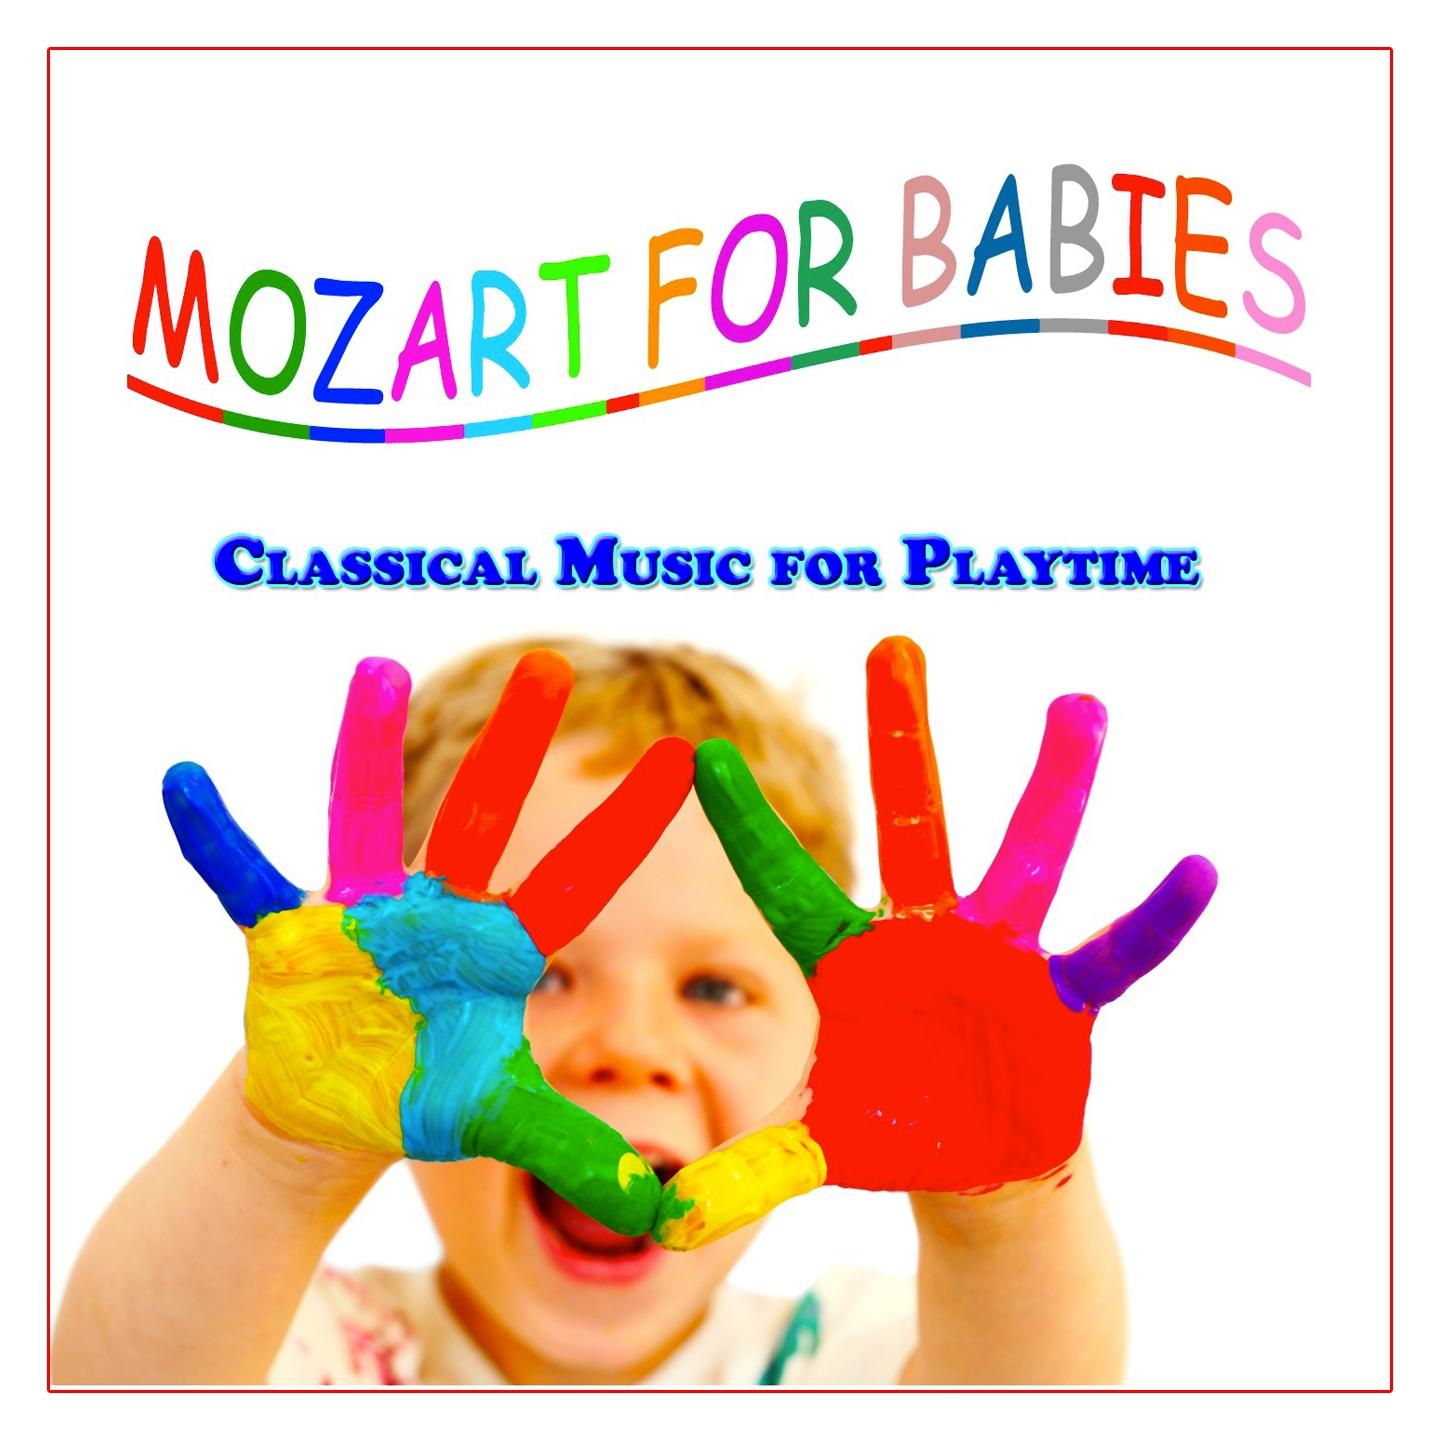 Mozart for Babies (Classical Music for Playtime)